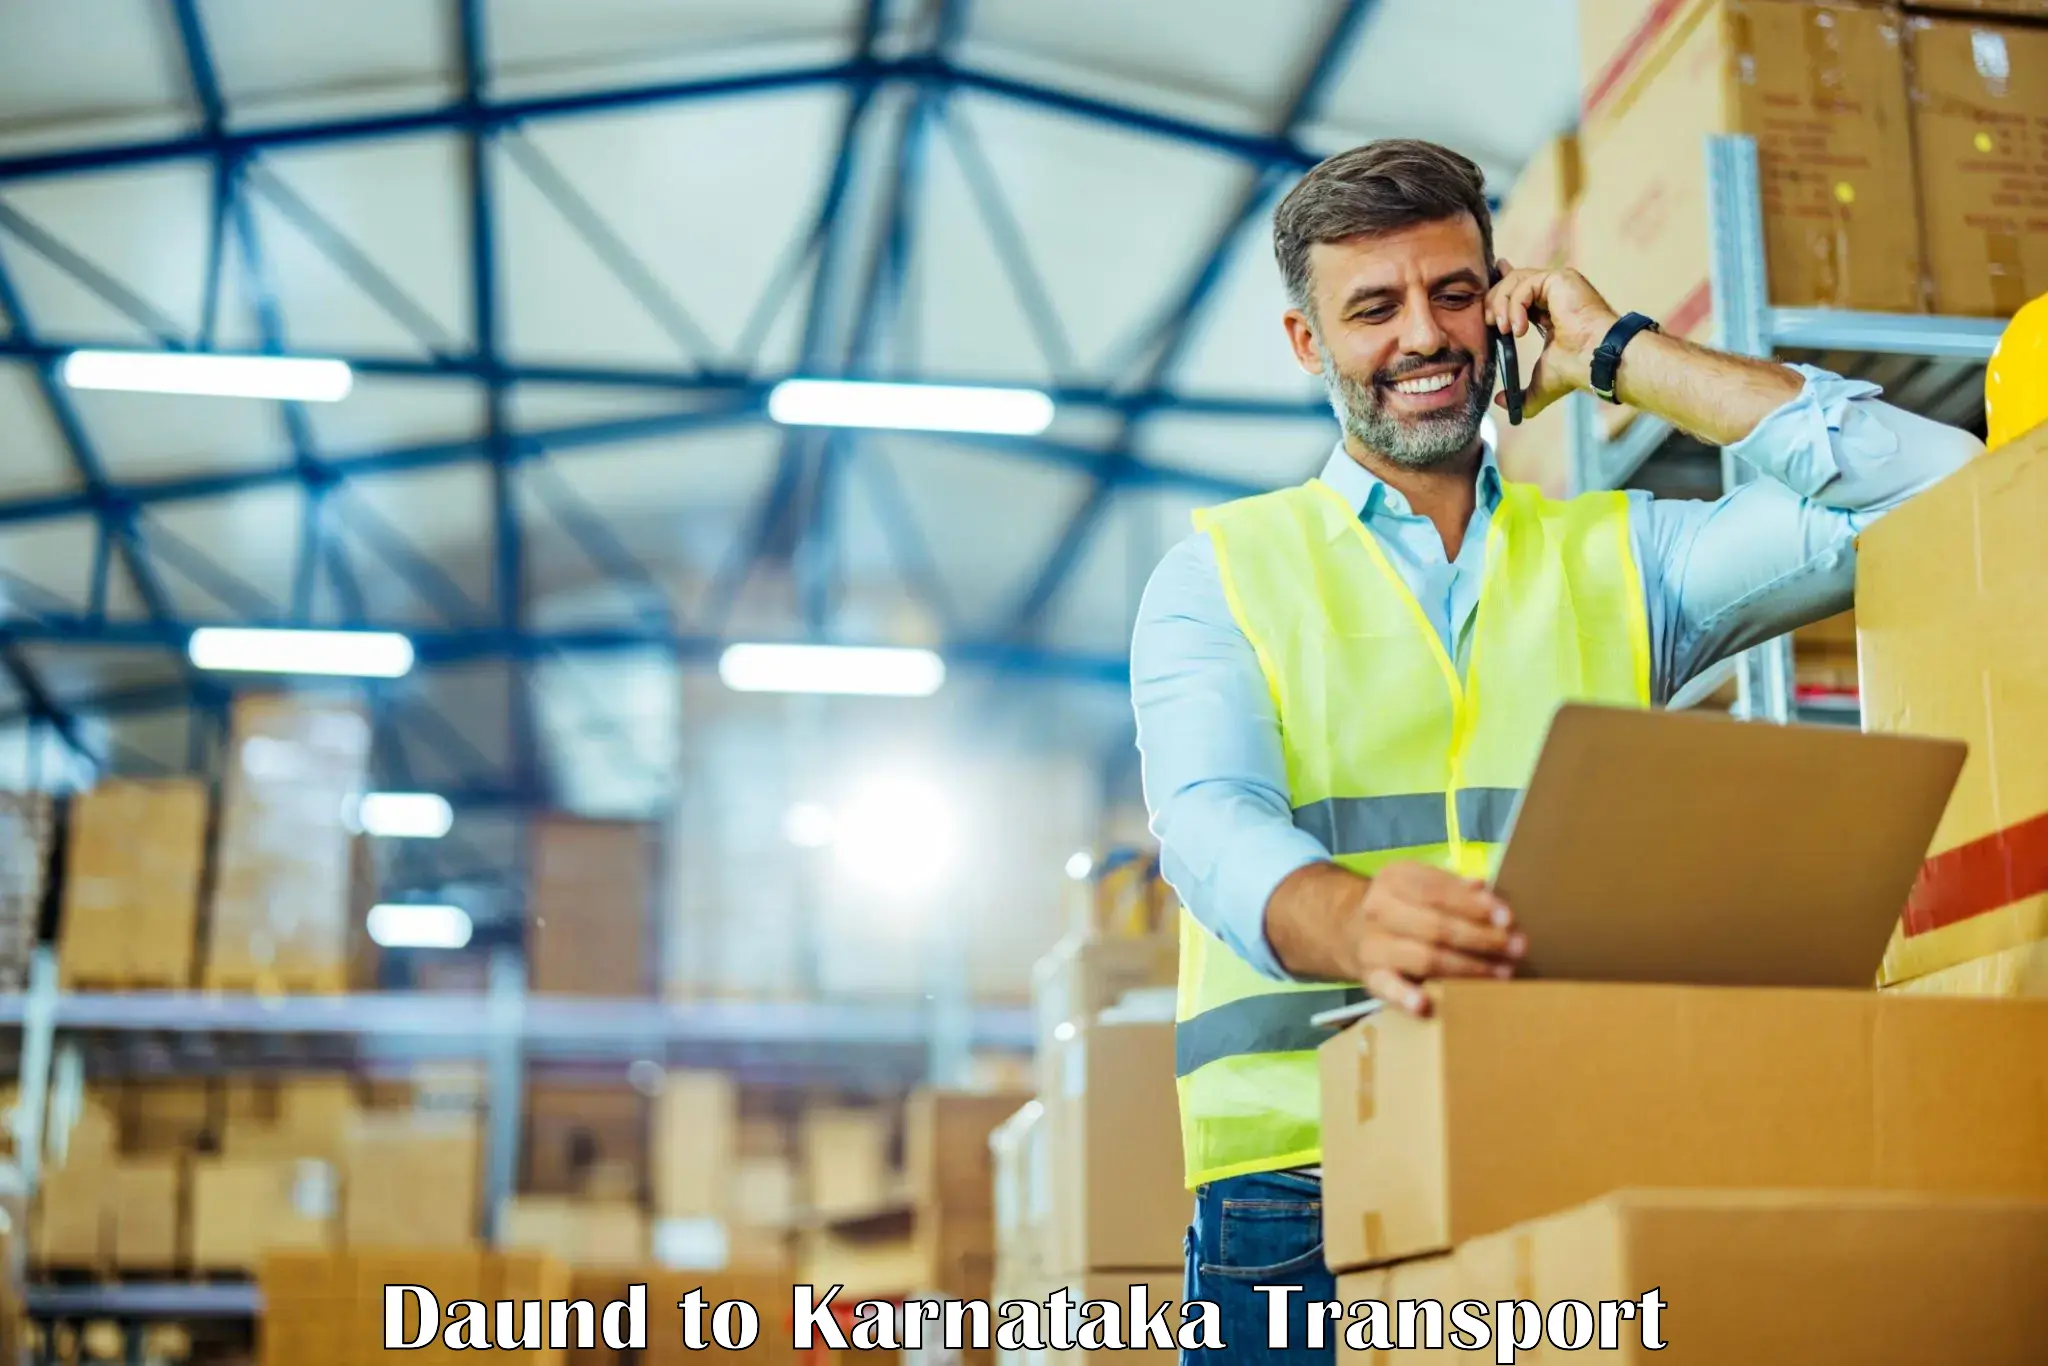 Commercial transport service Daund to Challakere